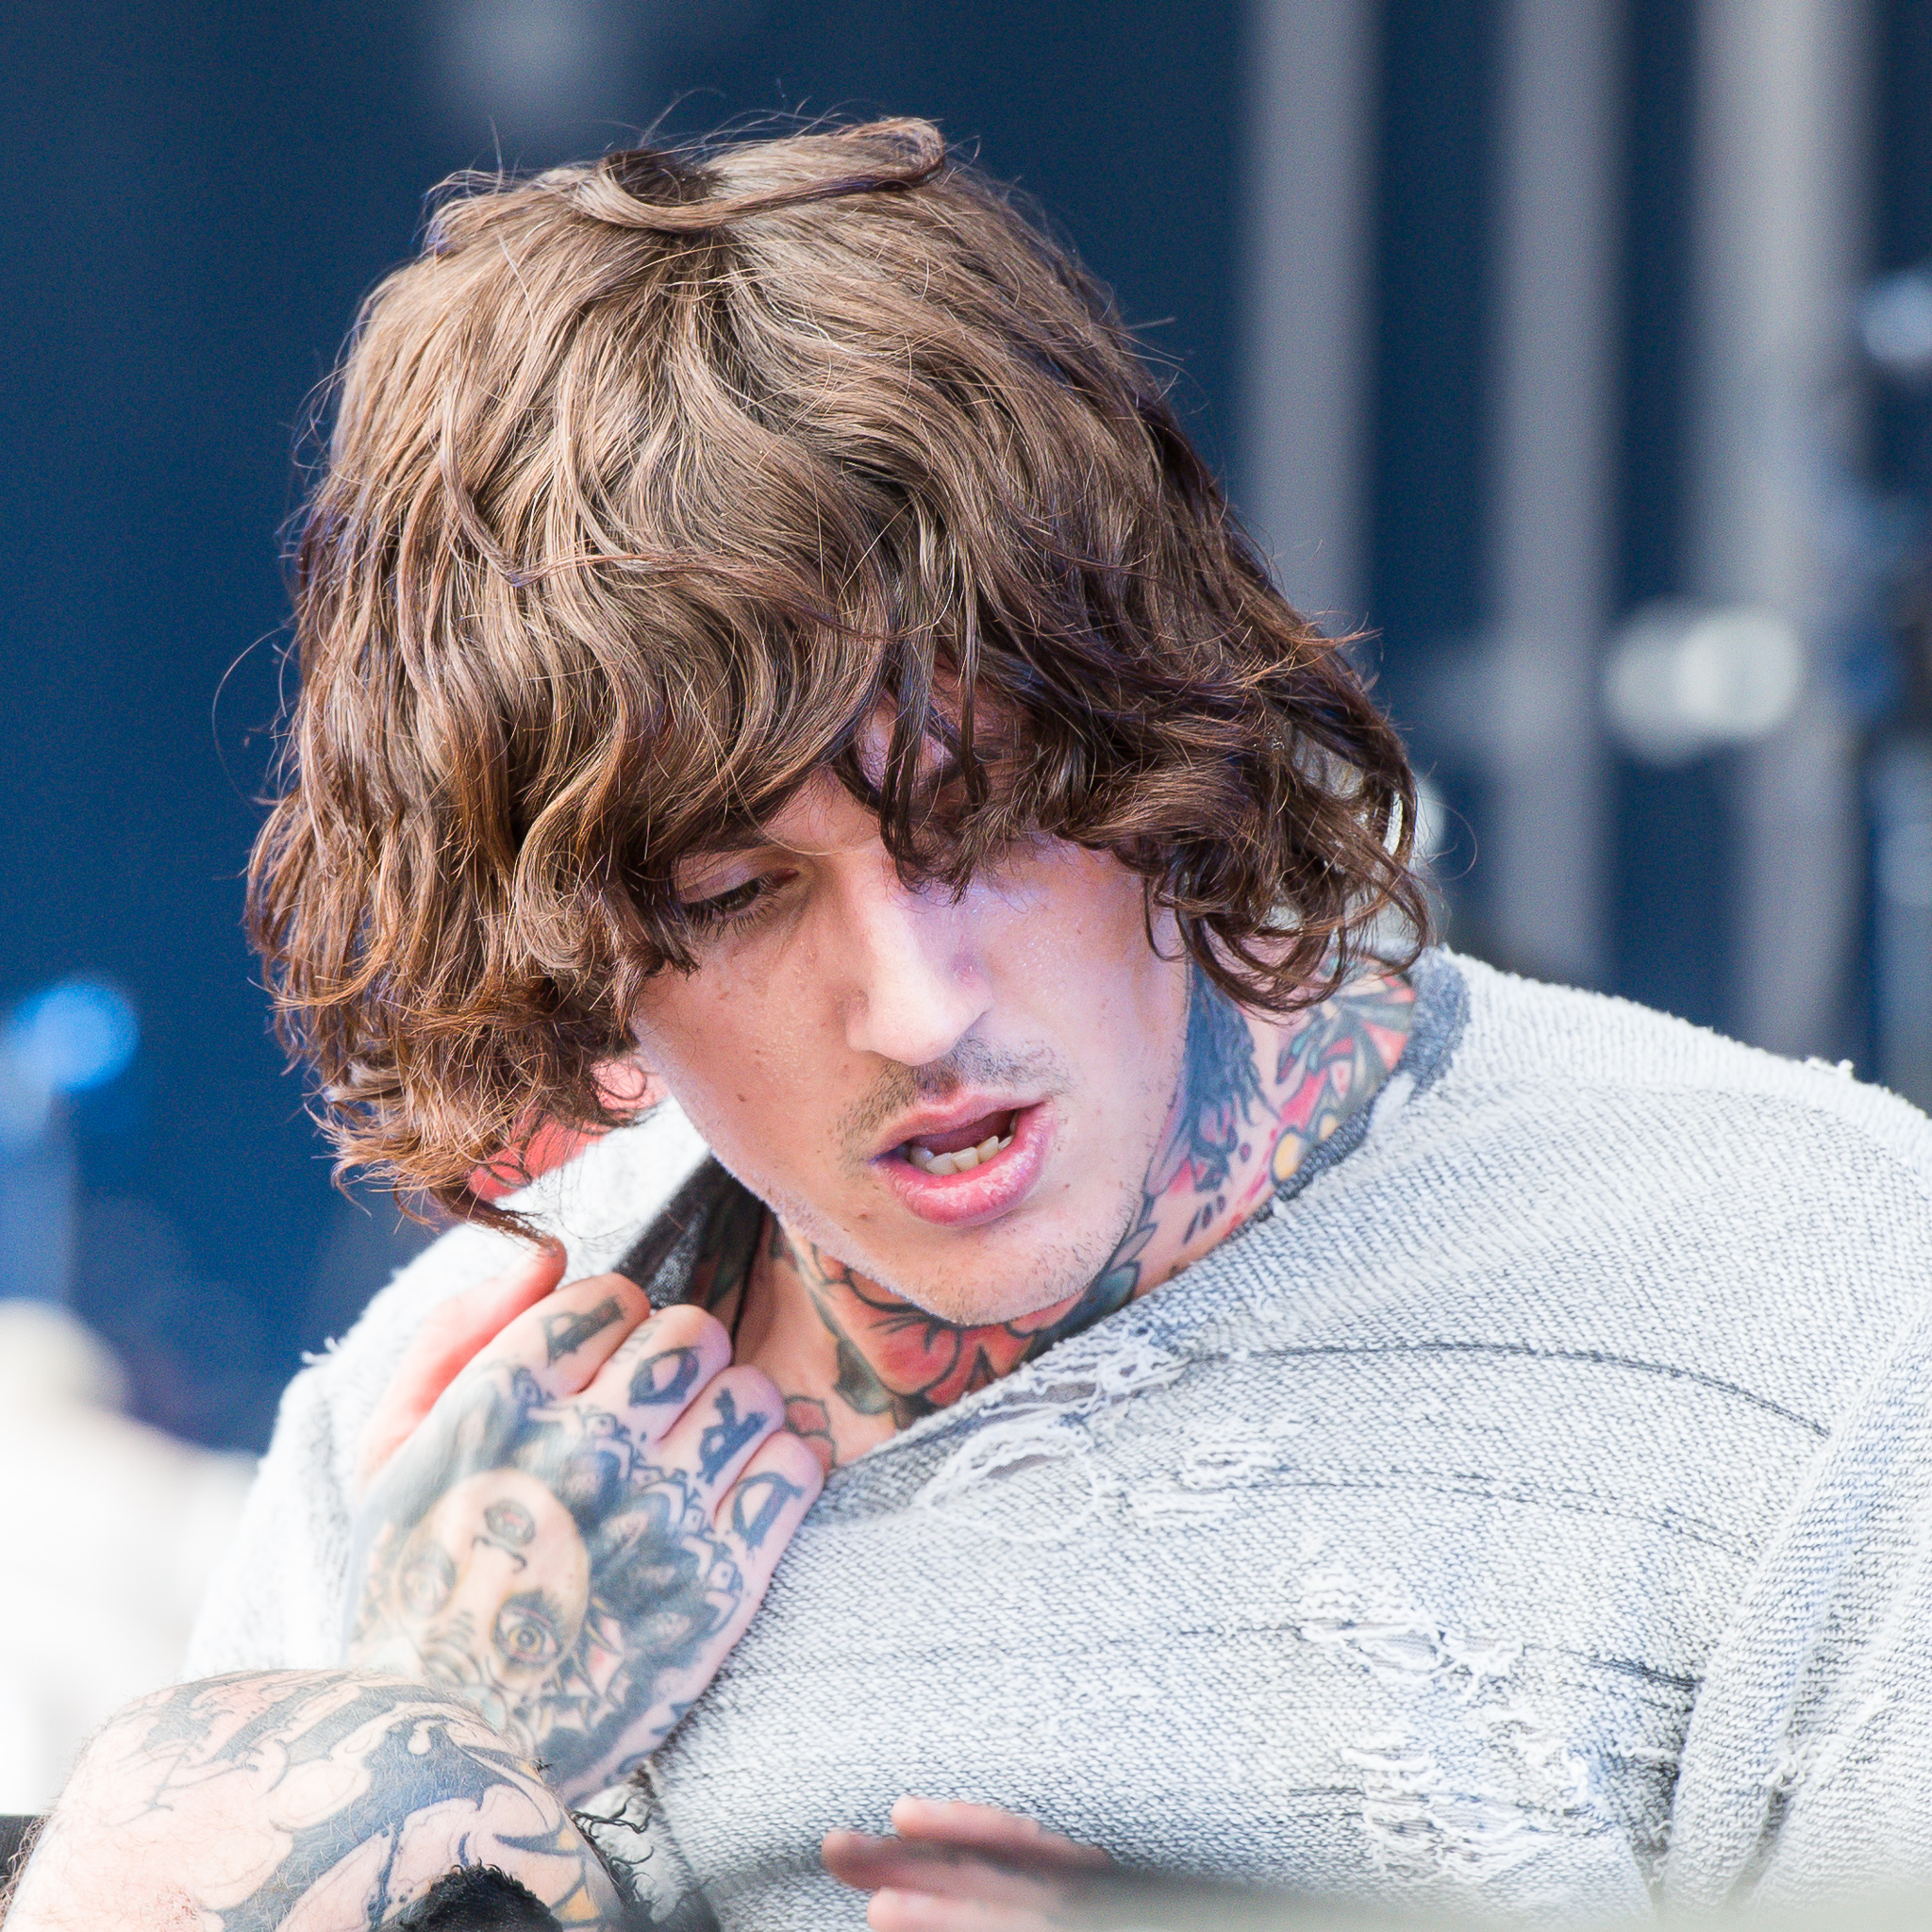 File:2016 RiP Bring Me the Horizon - Oliver Sykes - by 2eight - 8SC6688.jpg  - Wikimedia Commons